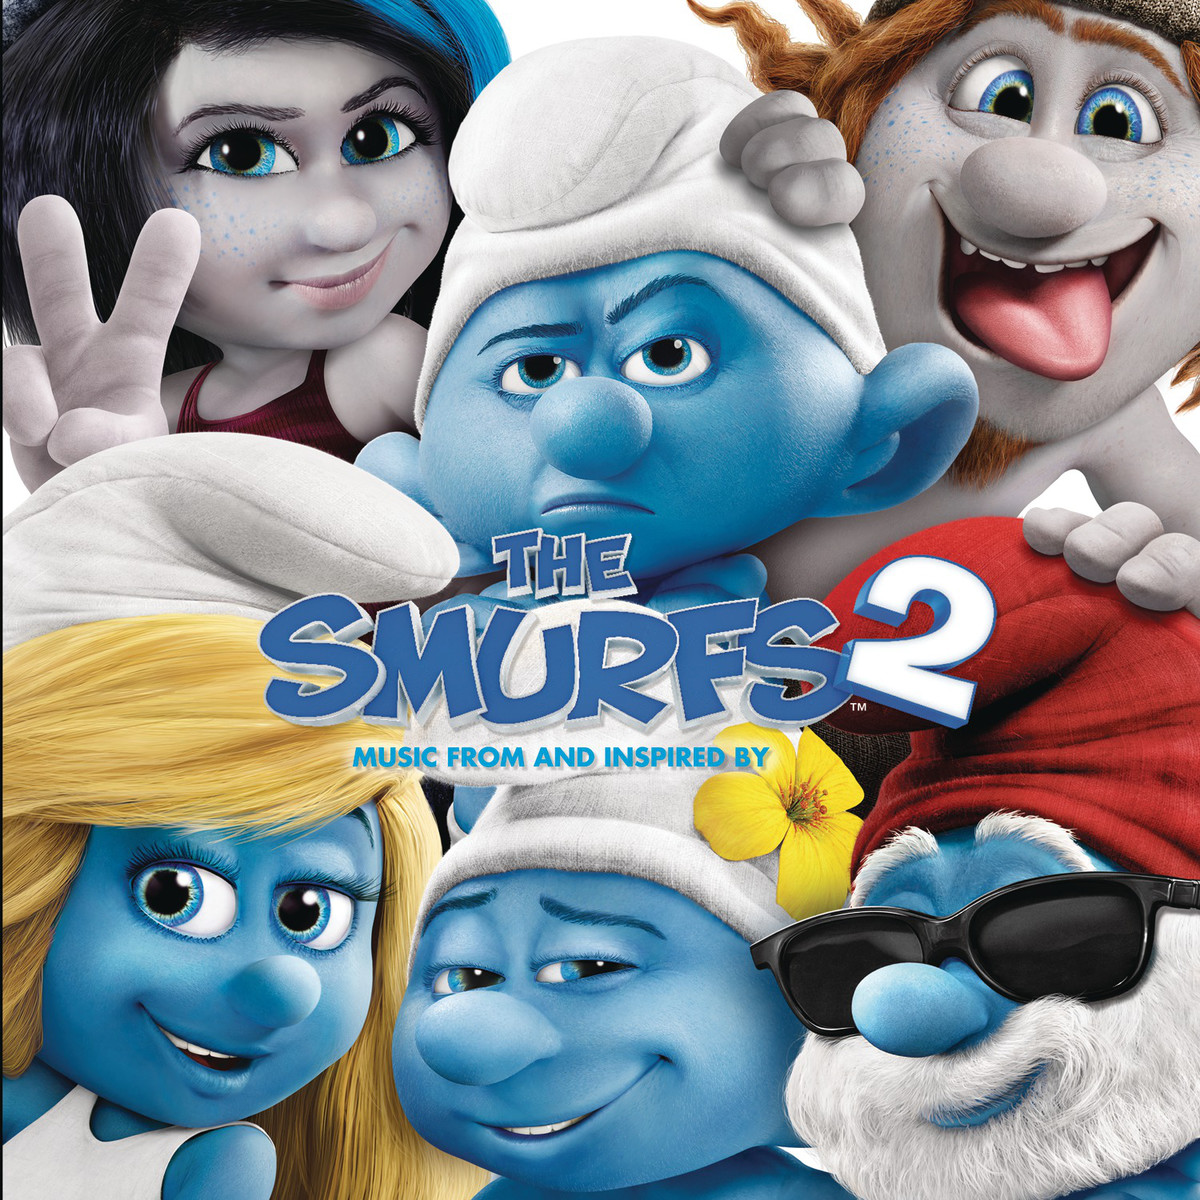 The Smurfs 2 Pics, Movie Collection